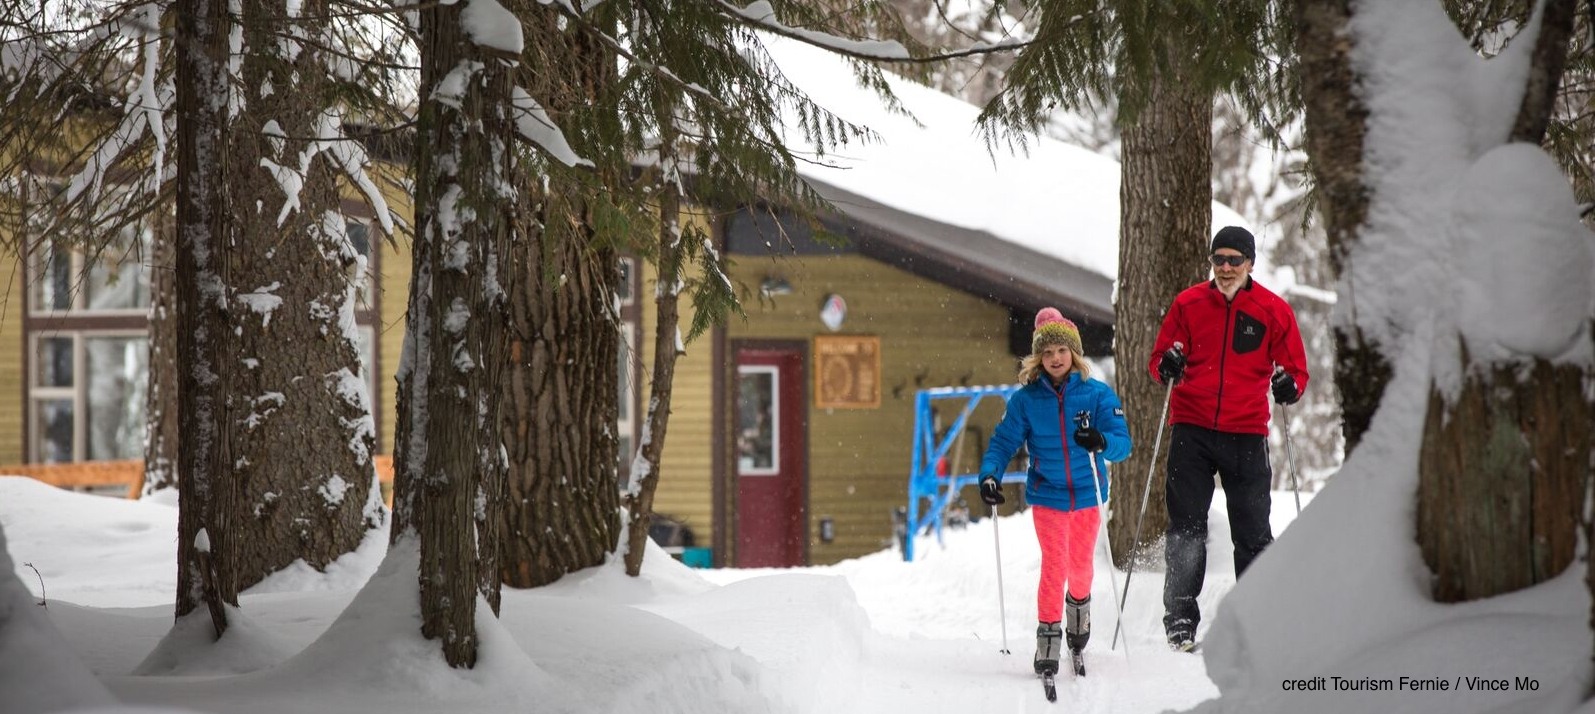 Nordic skiing for all ages